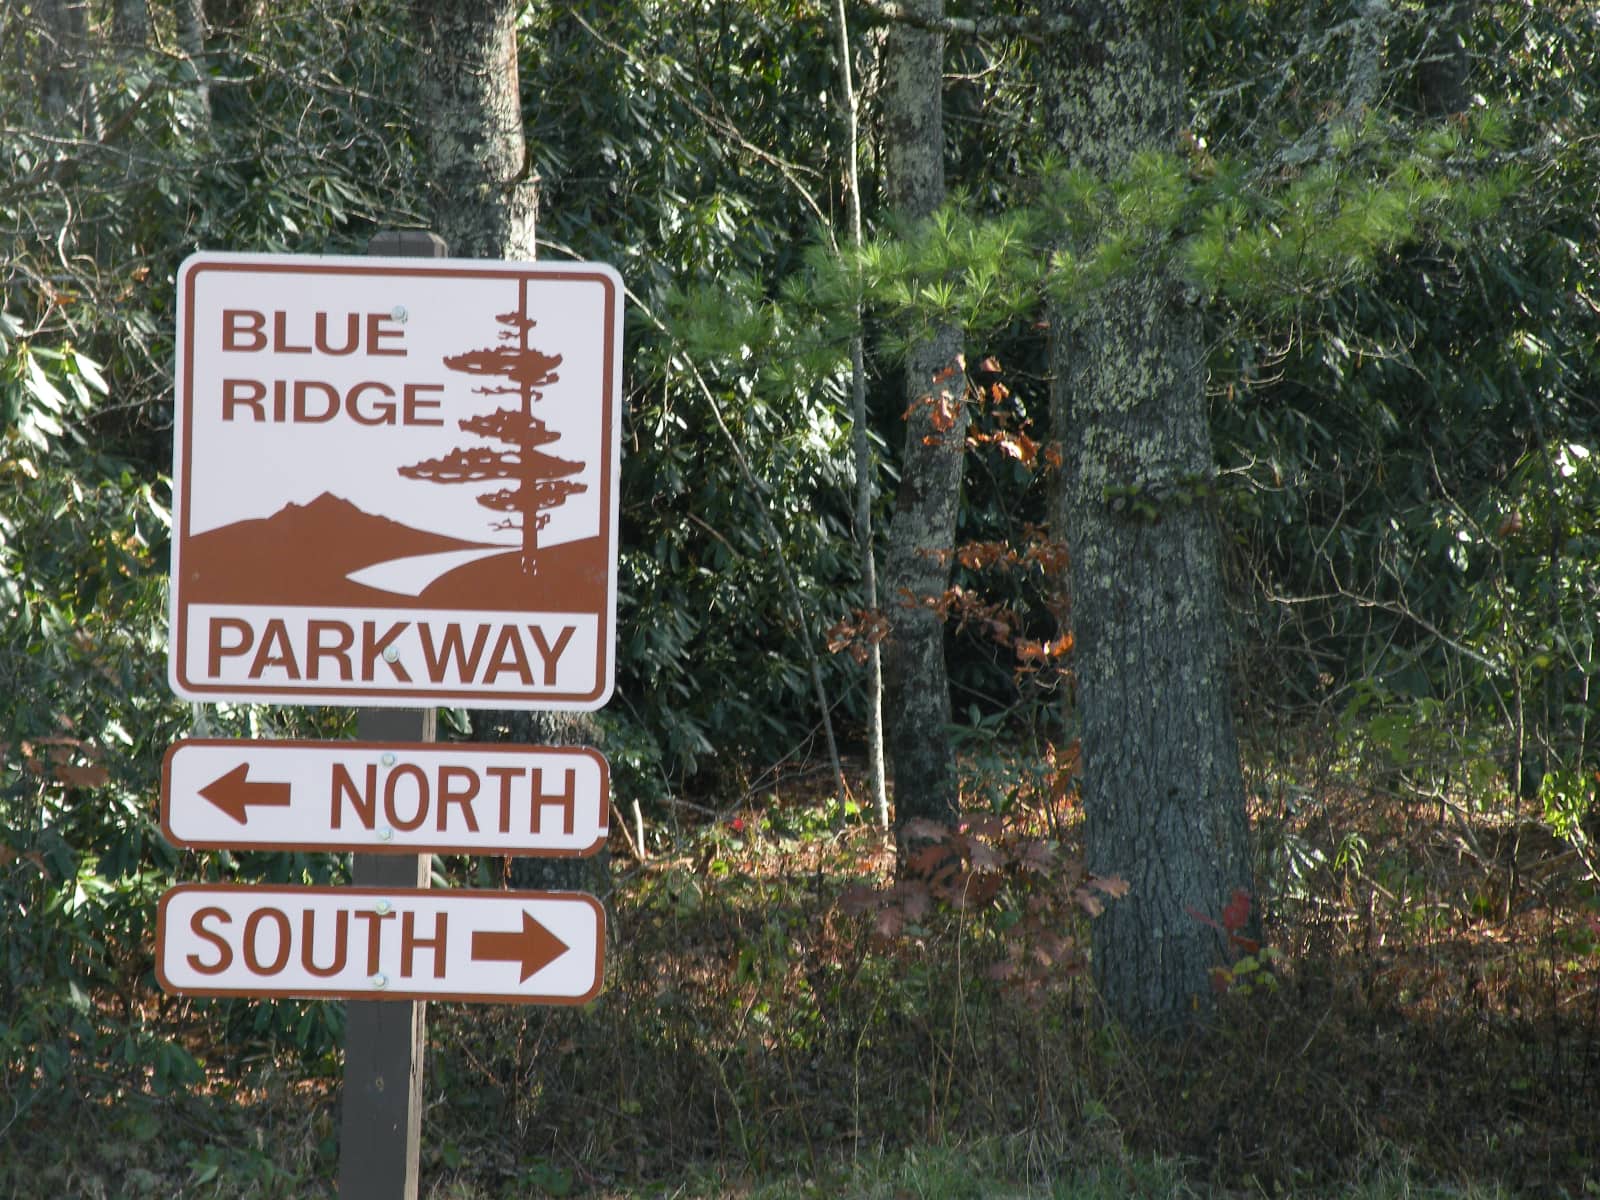 Road sign for Blue Ridge Parkway